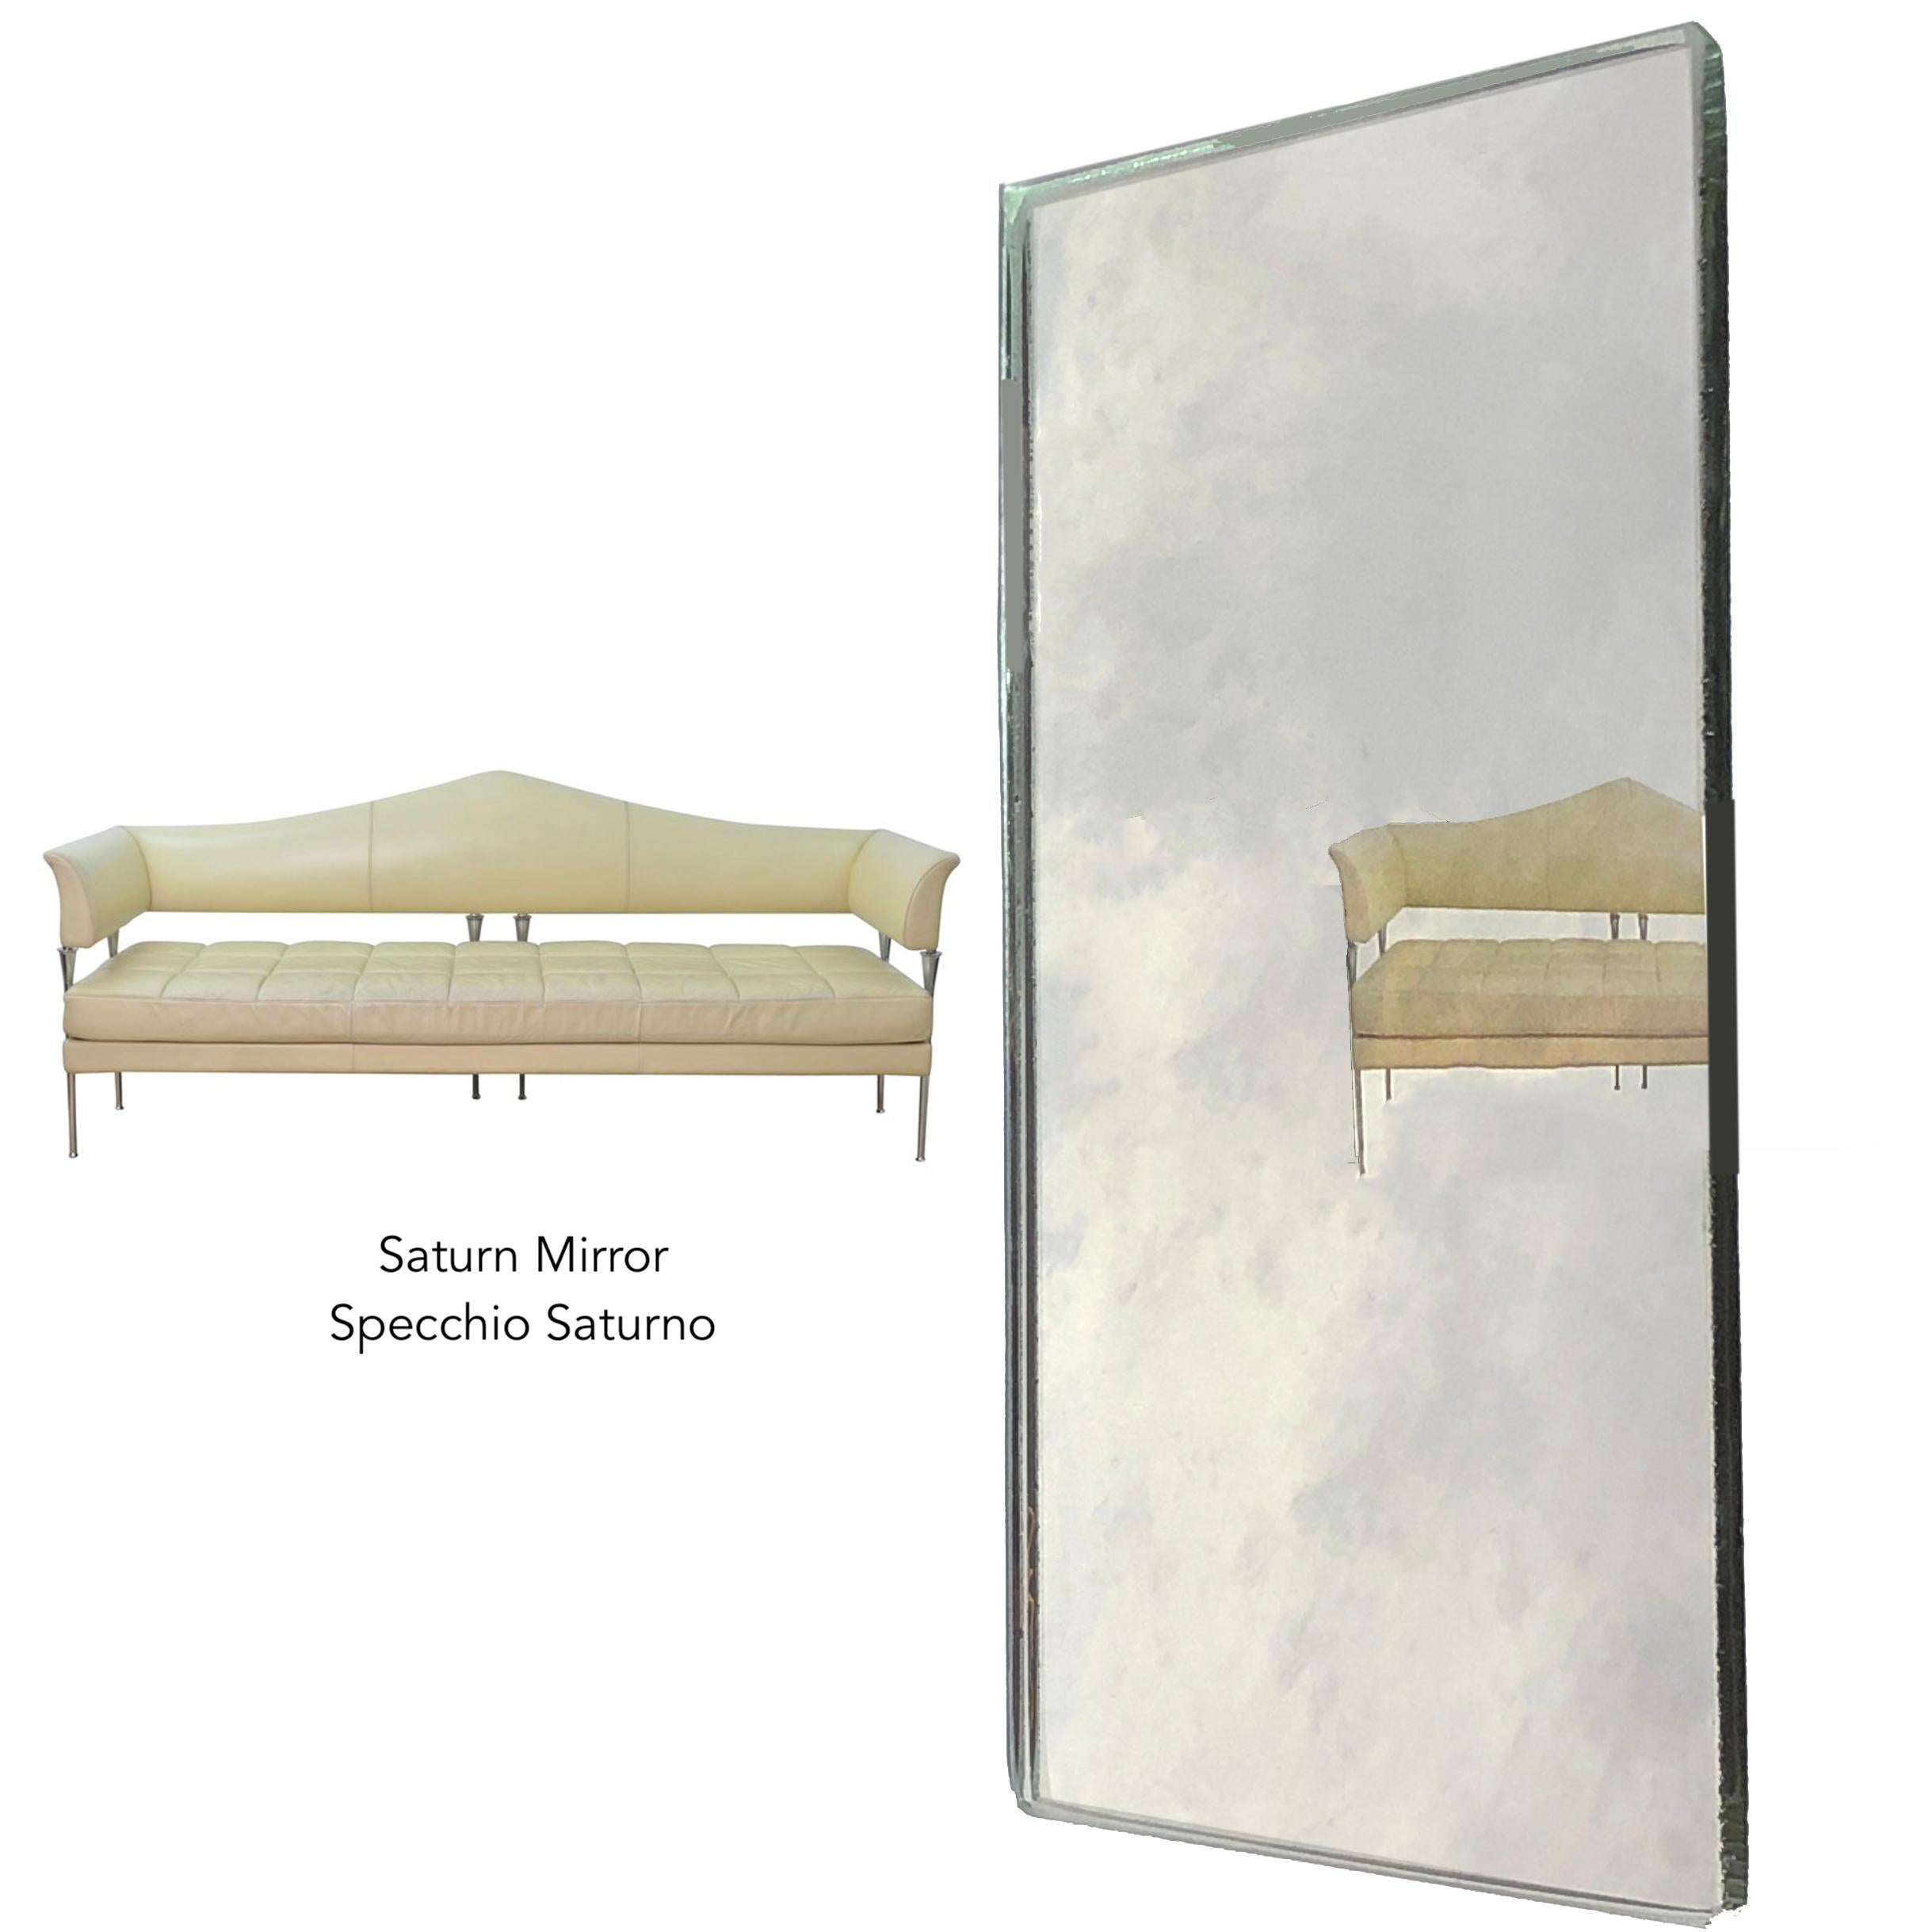 Art Deco Style Brass Frame and Divisors Mirror with Bronze Glass, Customizable 7